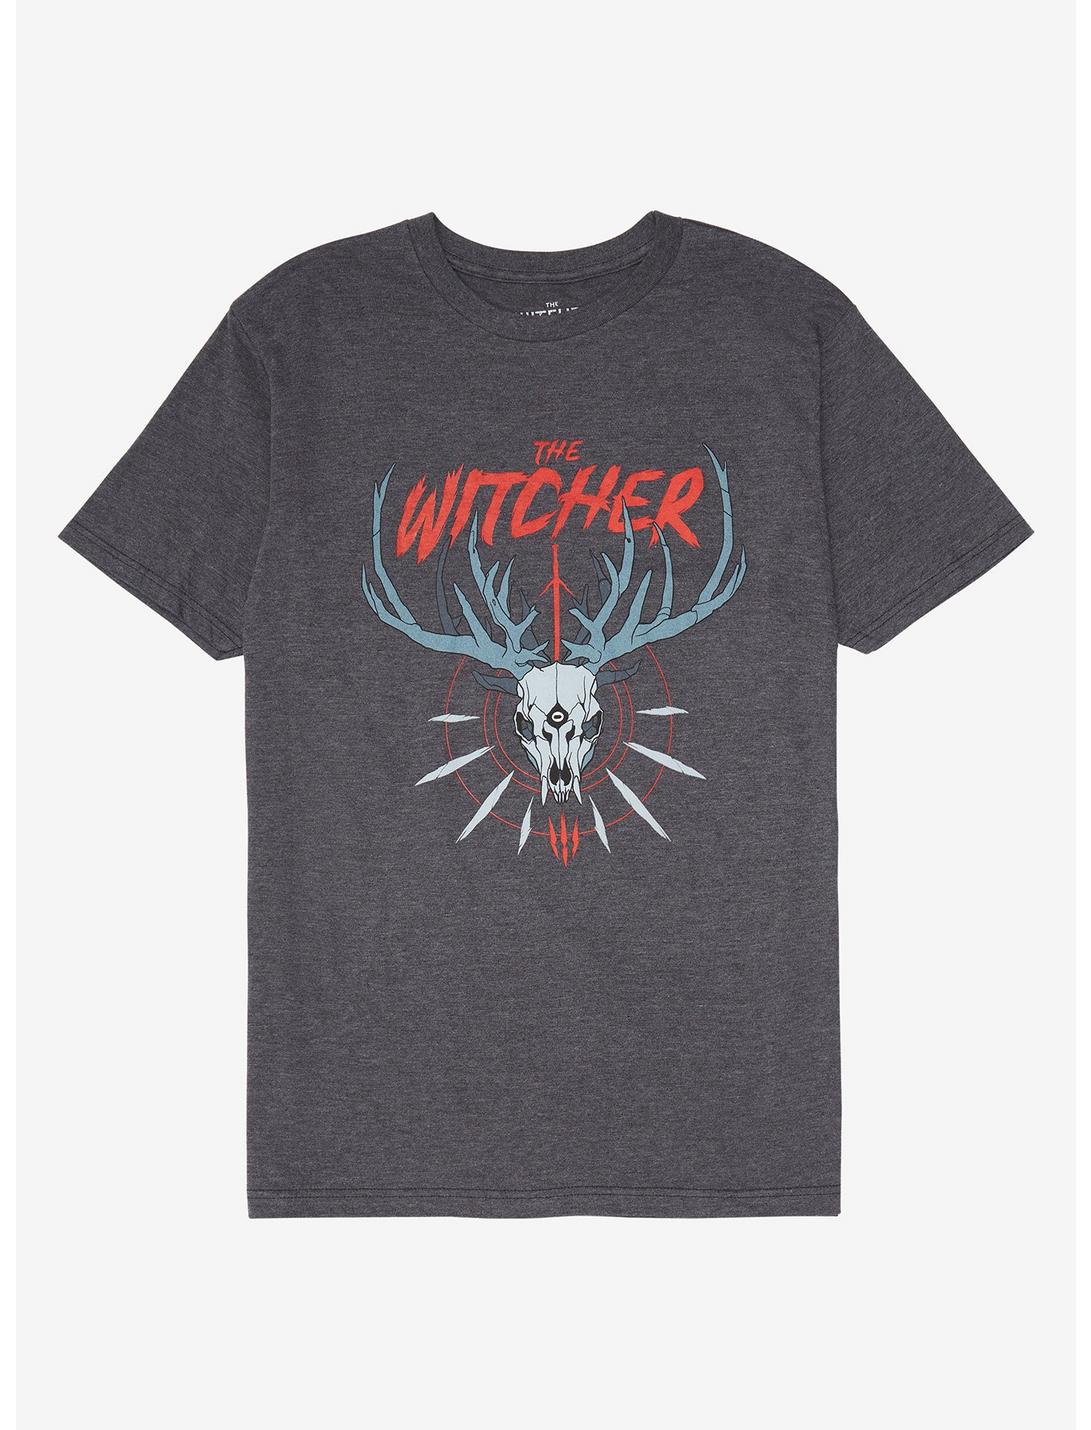 The Witcher III: The Wild Hunt Leshen Trophy T-Shirt, CHARCOAL  GREY, hi-res